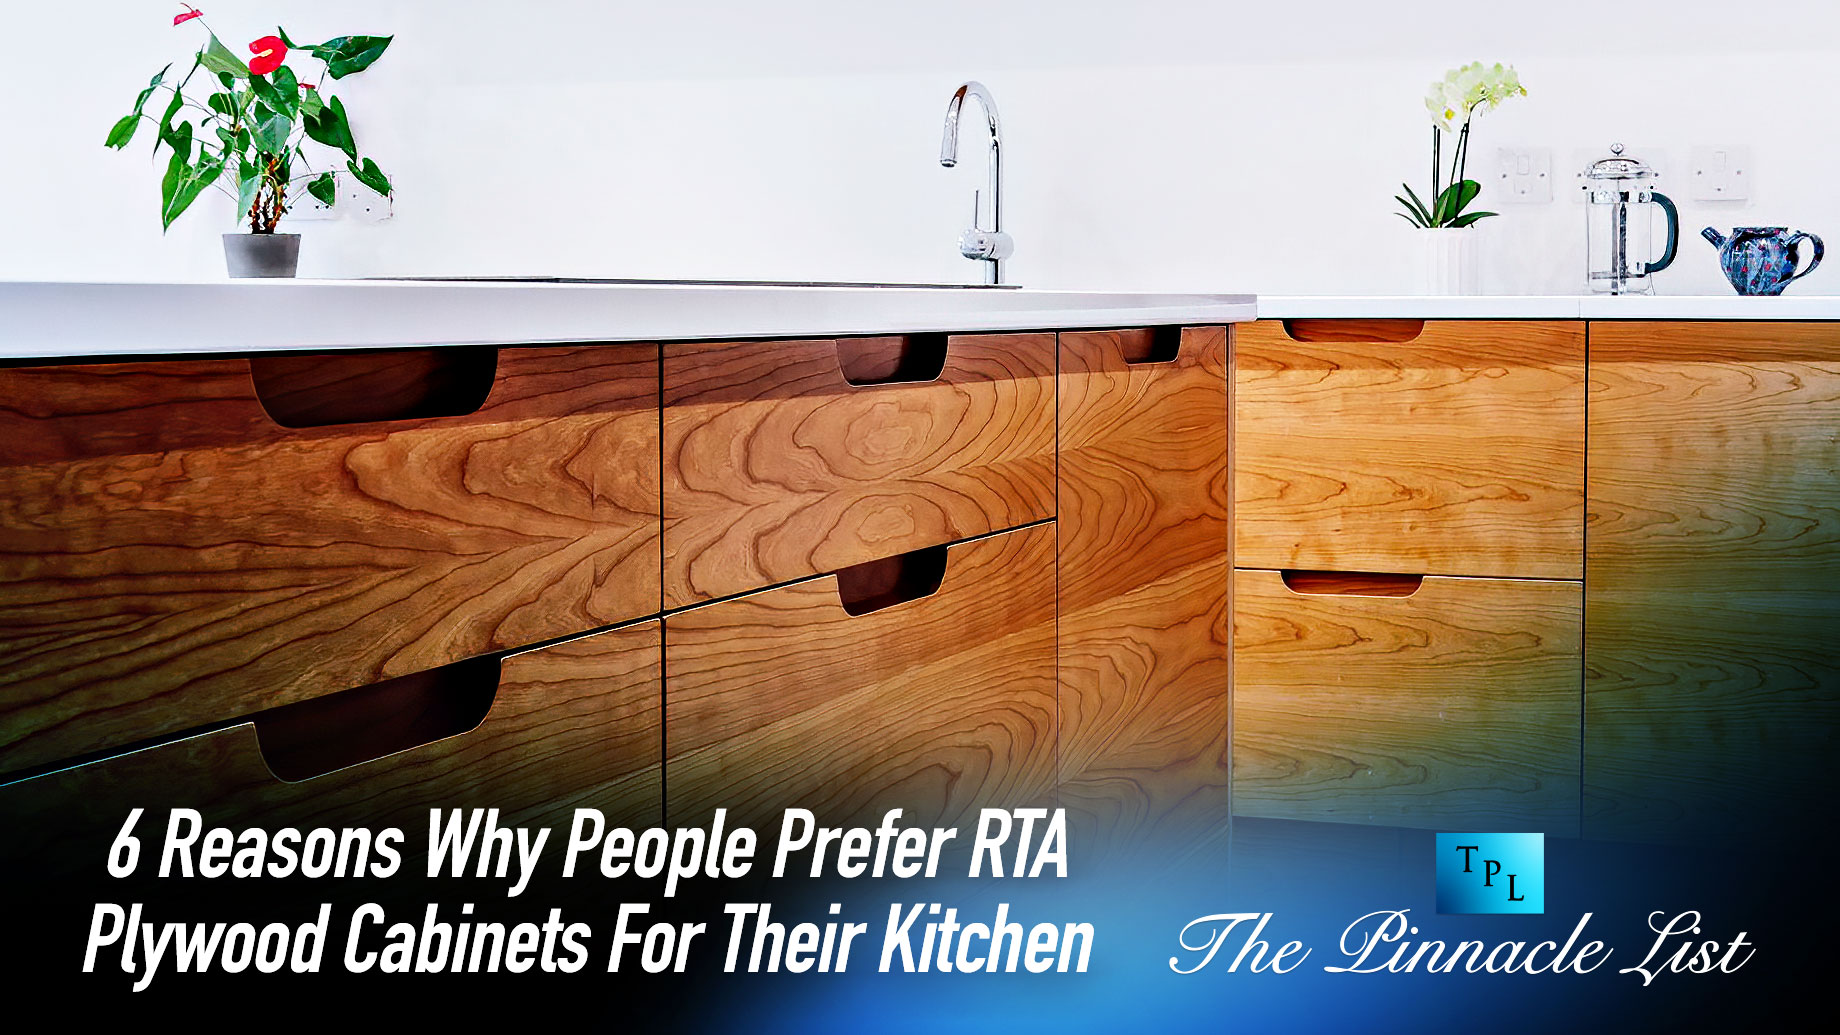 6 Reasons Why People Prefer RTA Plywood Cabinets For Their Kitchen